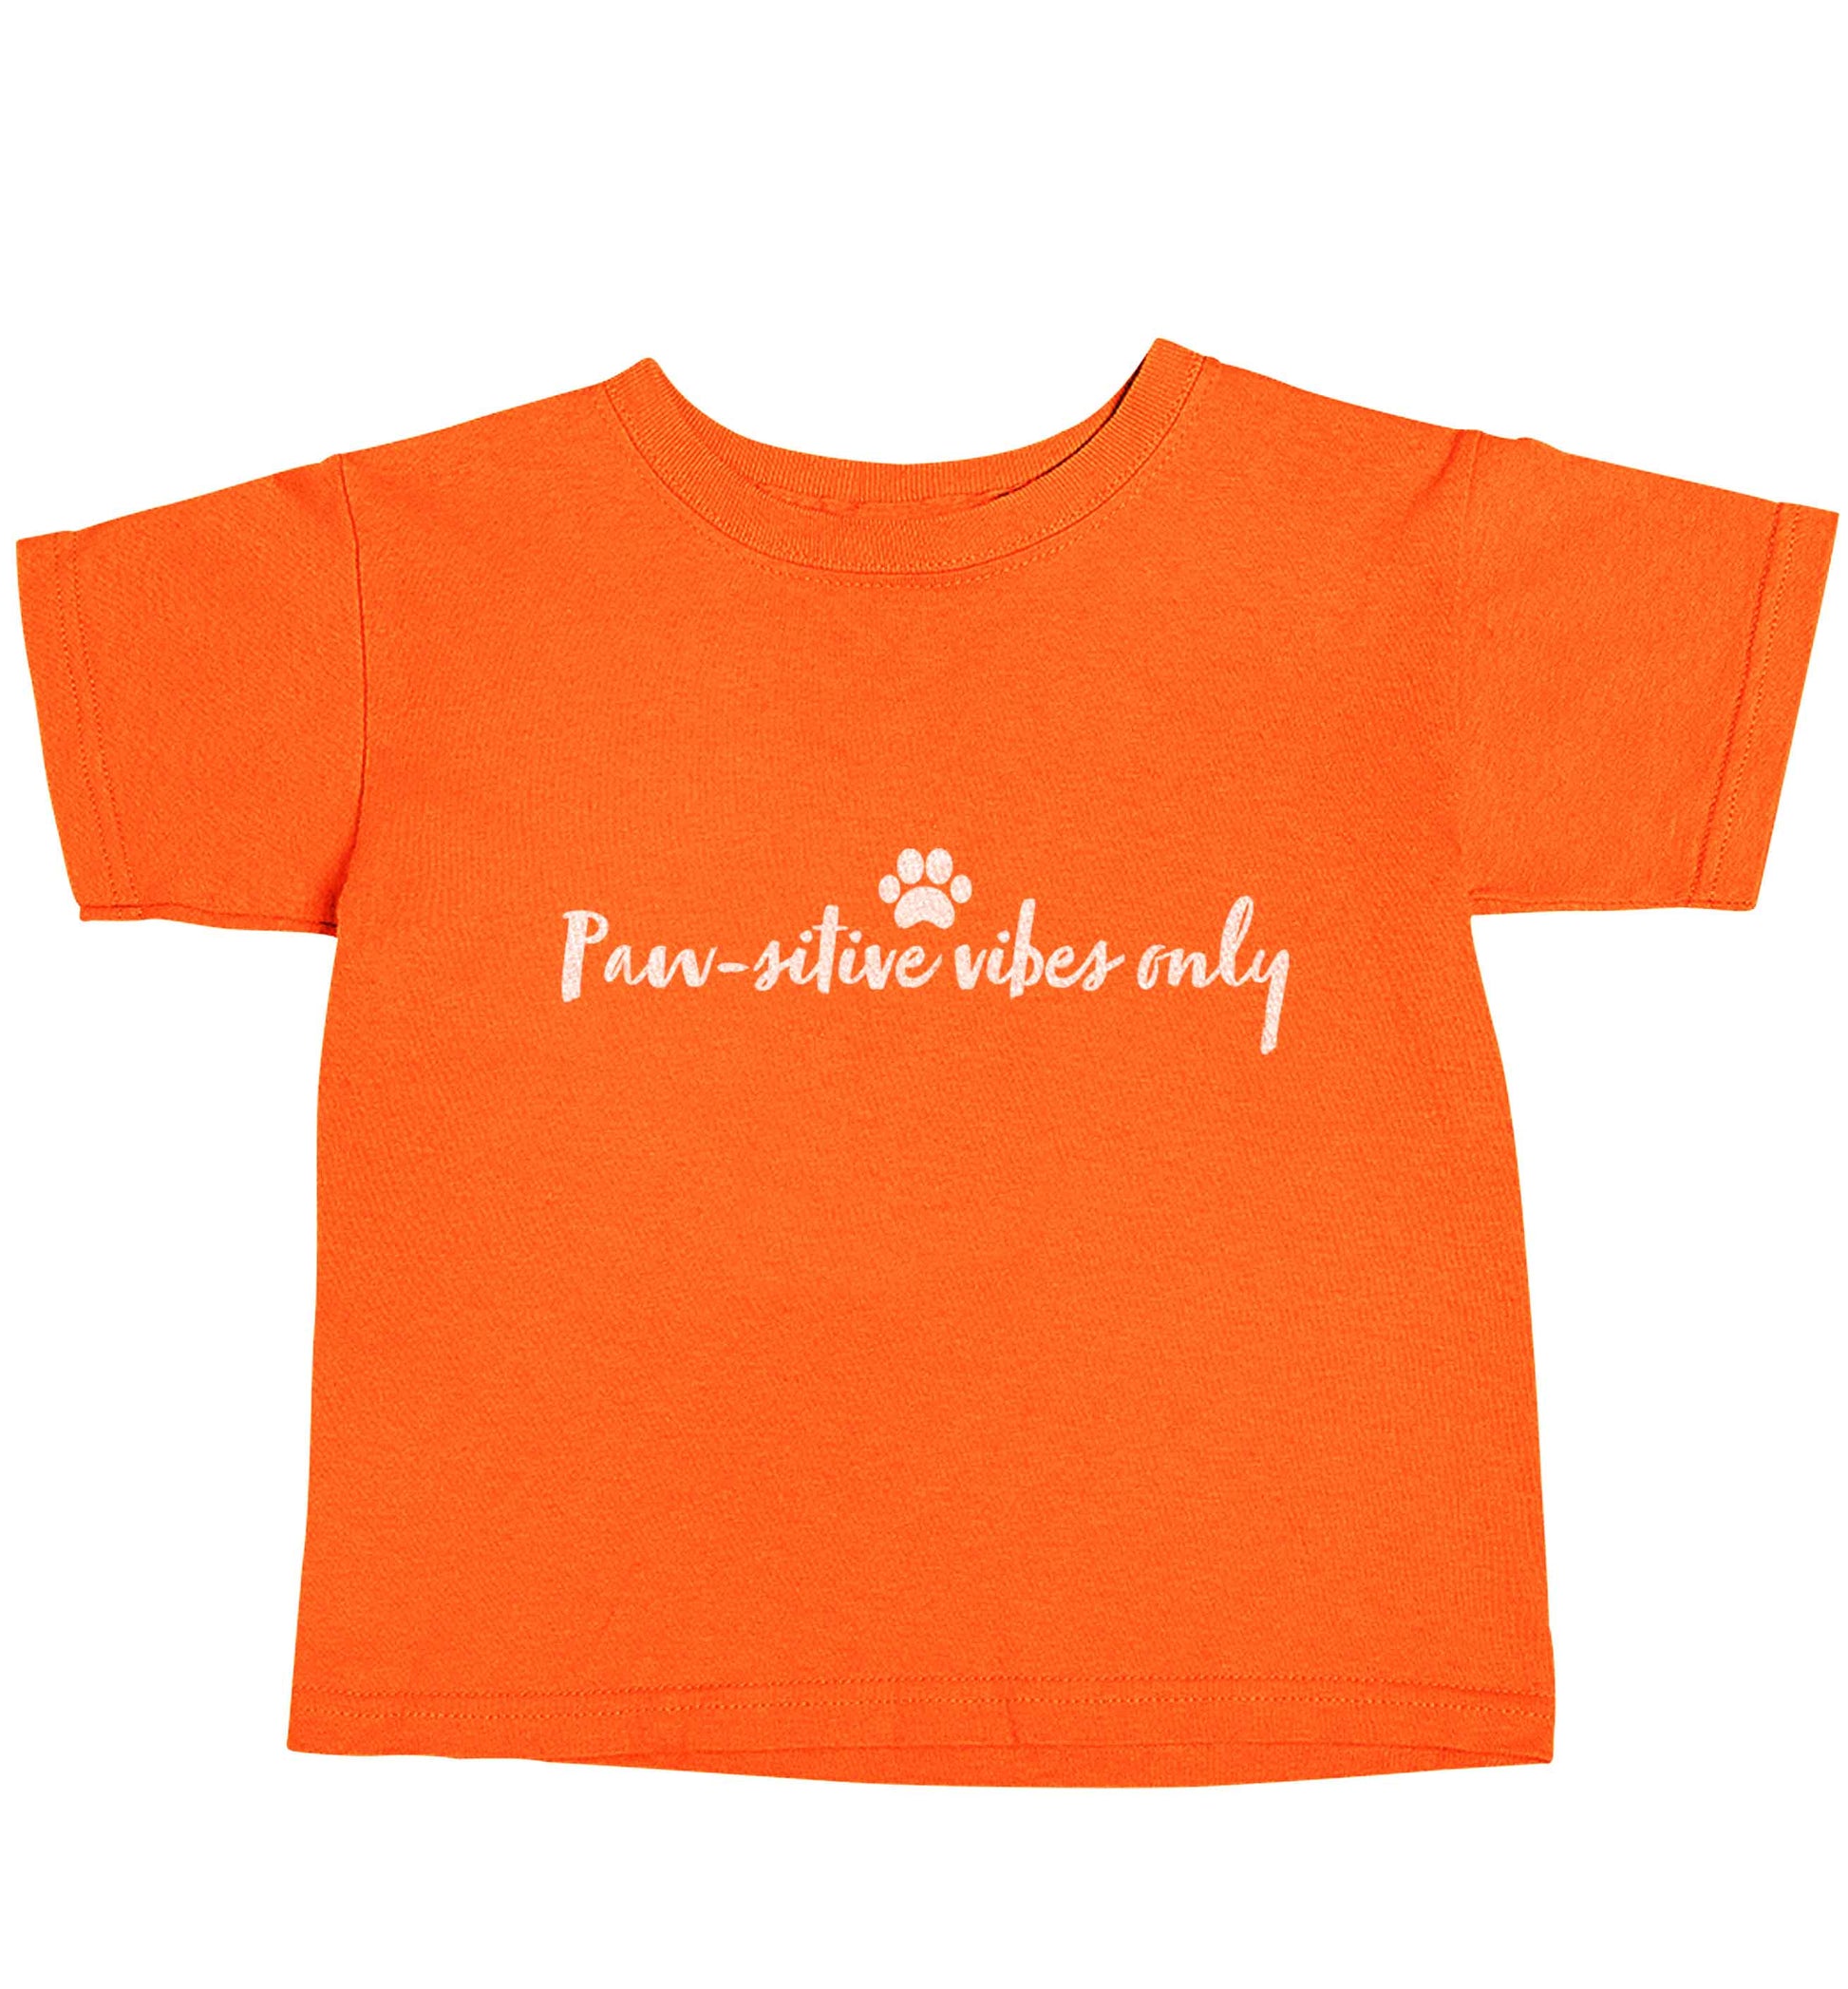 Pawsitive vibes only Kit orange baby toddler Tshirt 2 Years